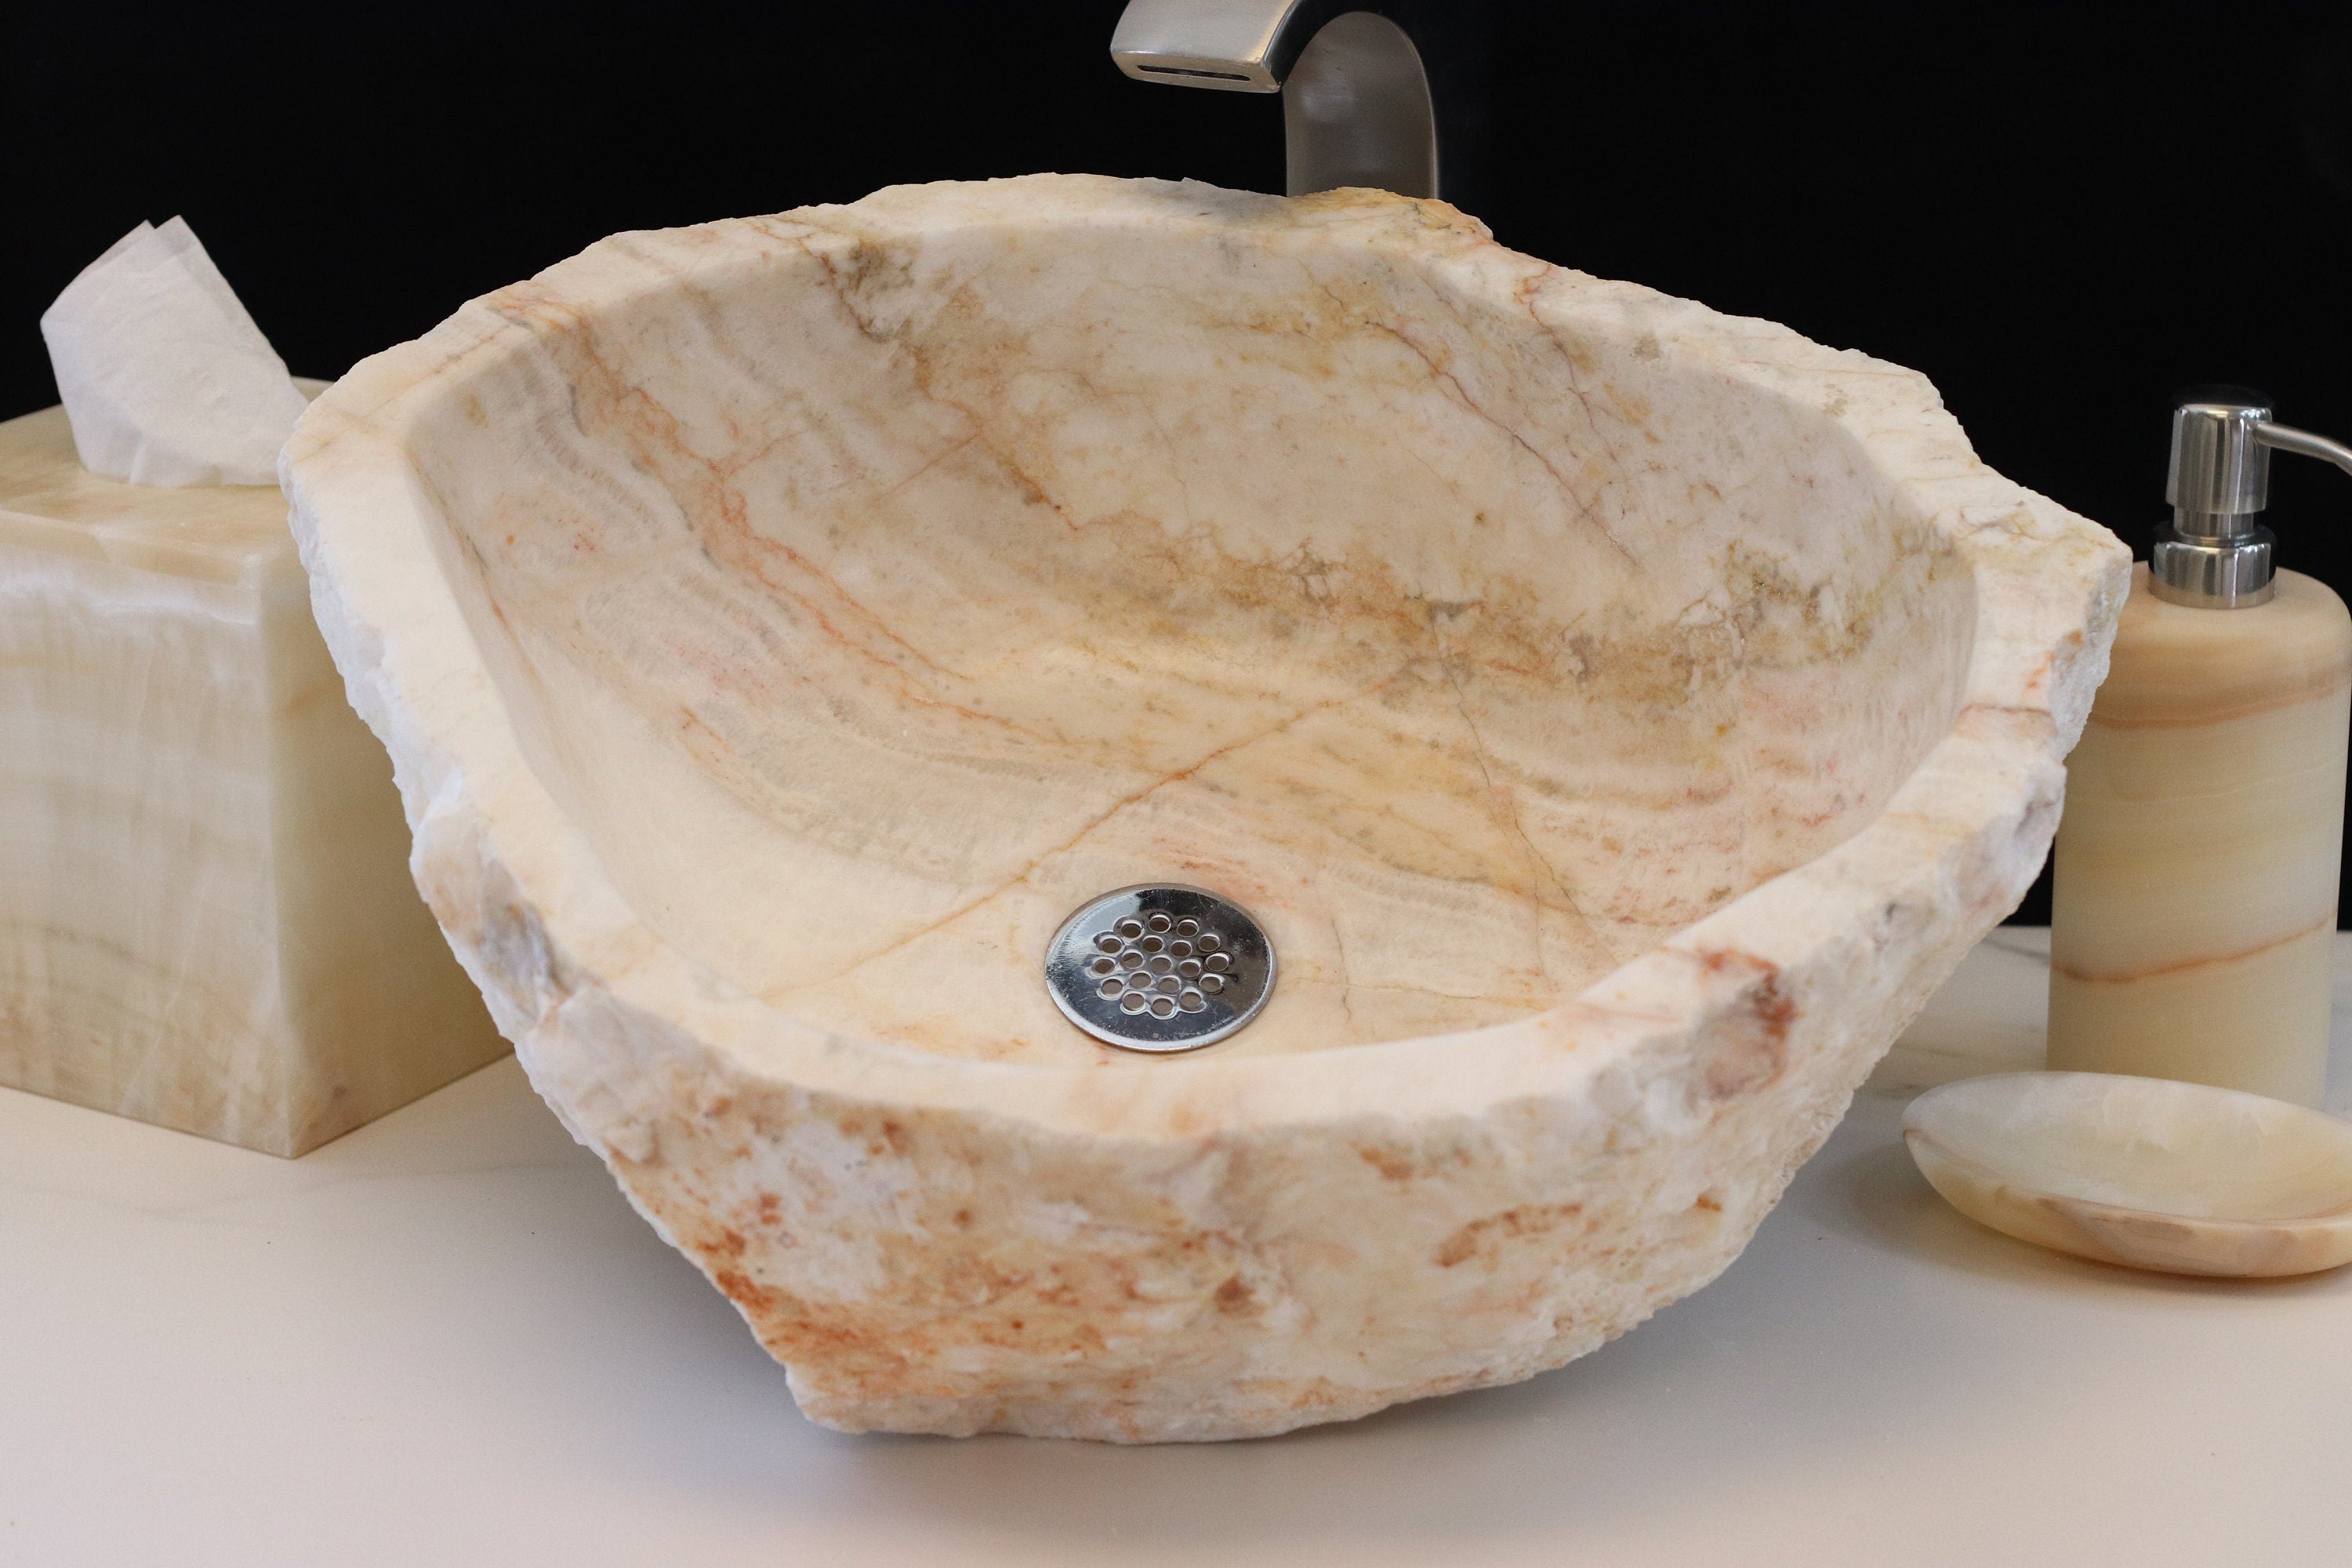 White and Beige Onyx Vessel Sink. Handmade in Mexico. We hand finish, package, and ship from the USA. Buy now at www.felipeandgrace.com. 